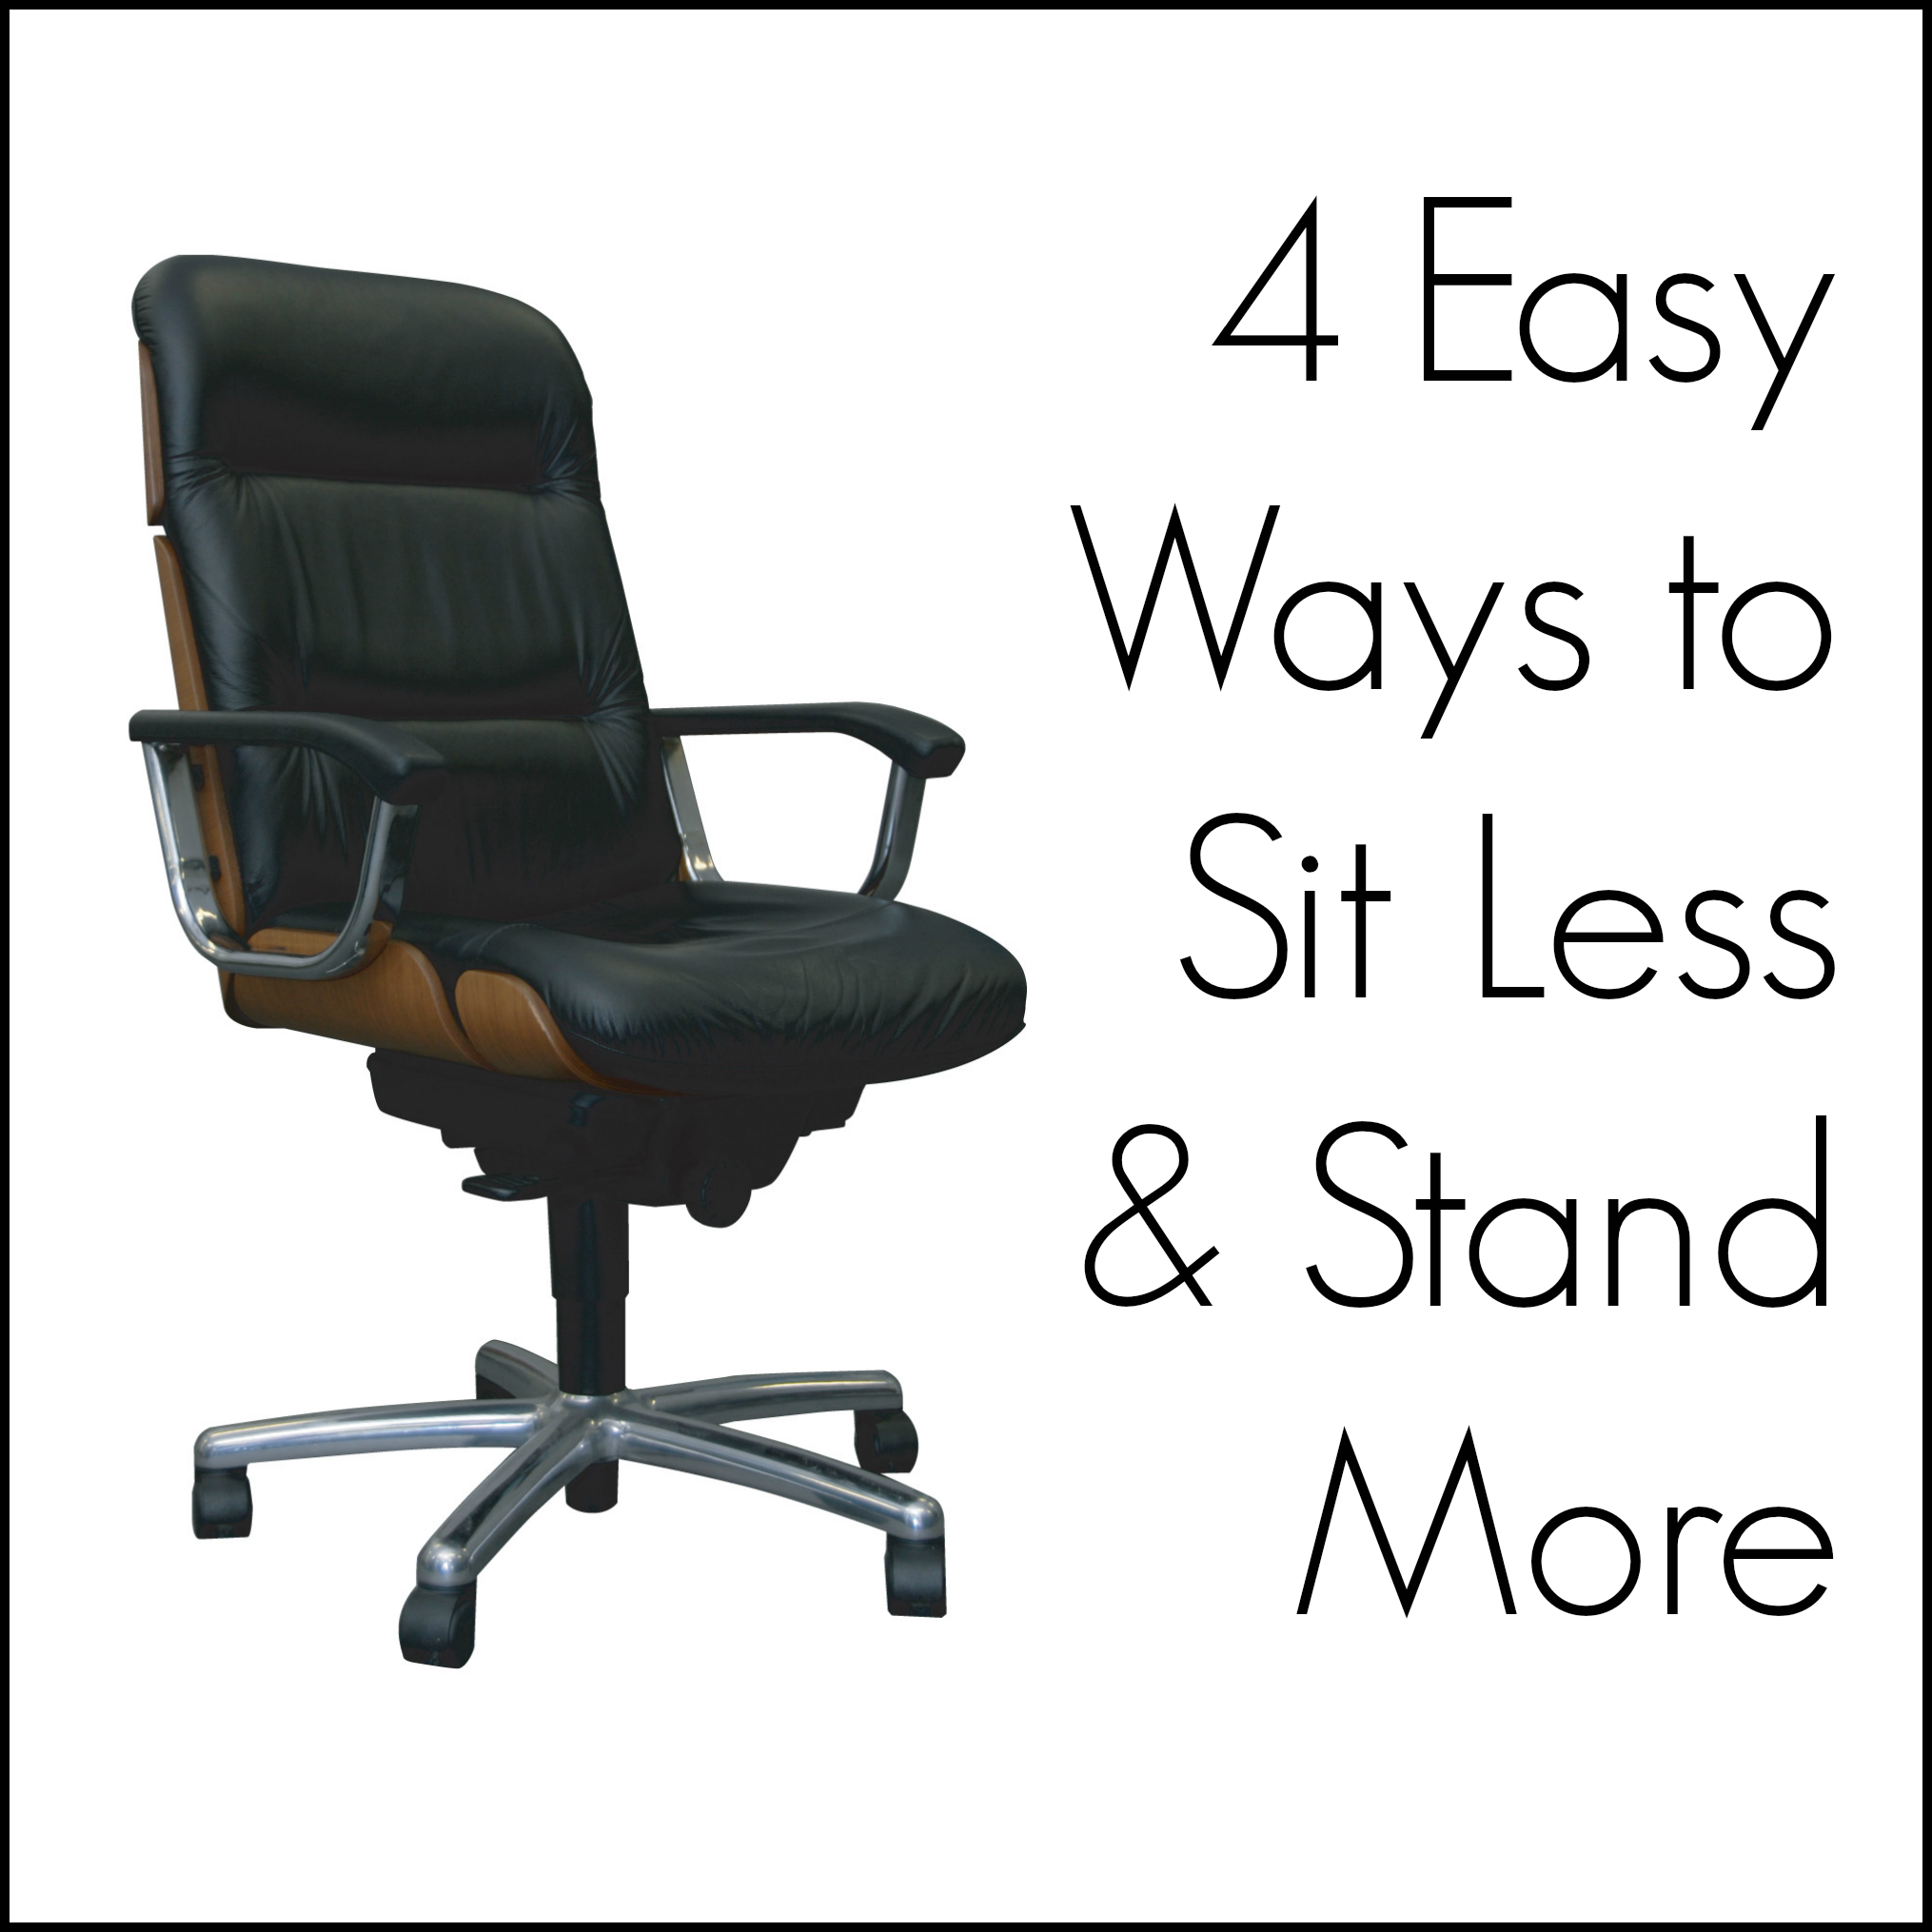 4 Easy Ways to Sit Less & Stand More